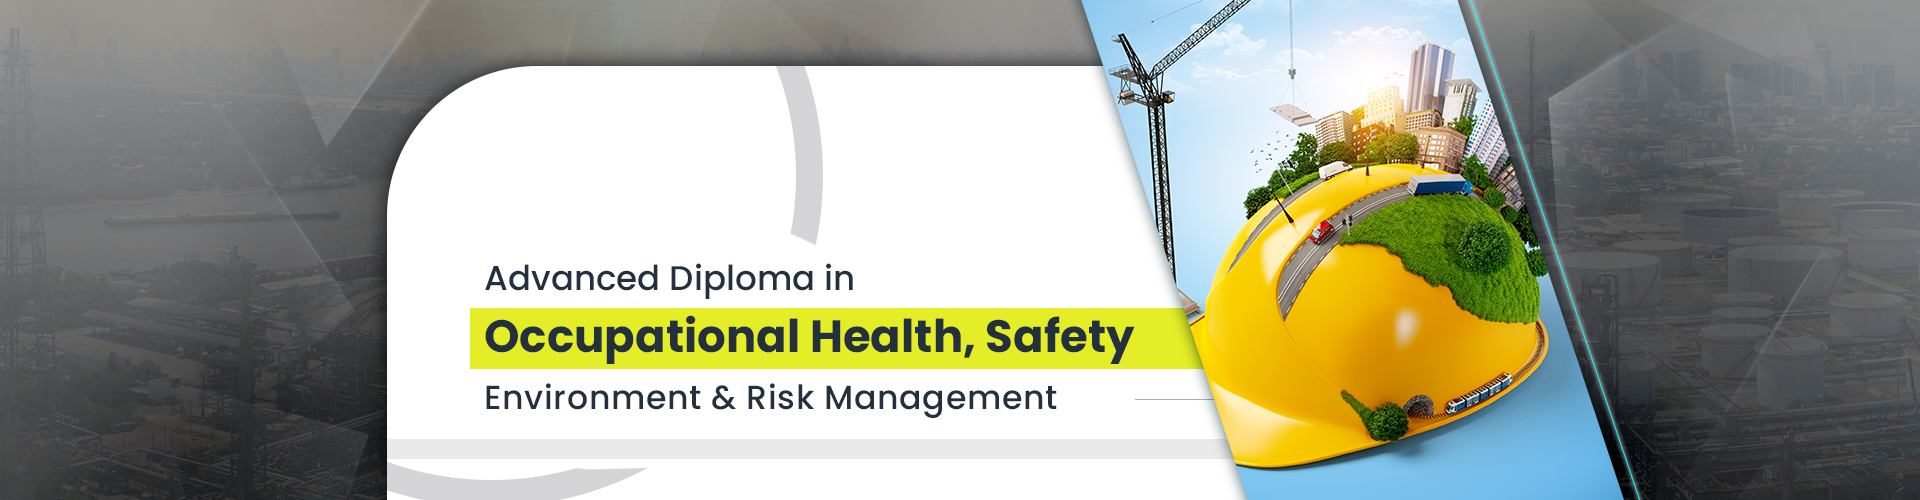 Advanced Diploma in Occupational Health, Safety, Environment & Risk Management